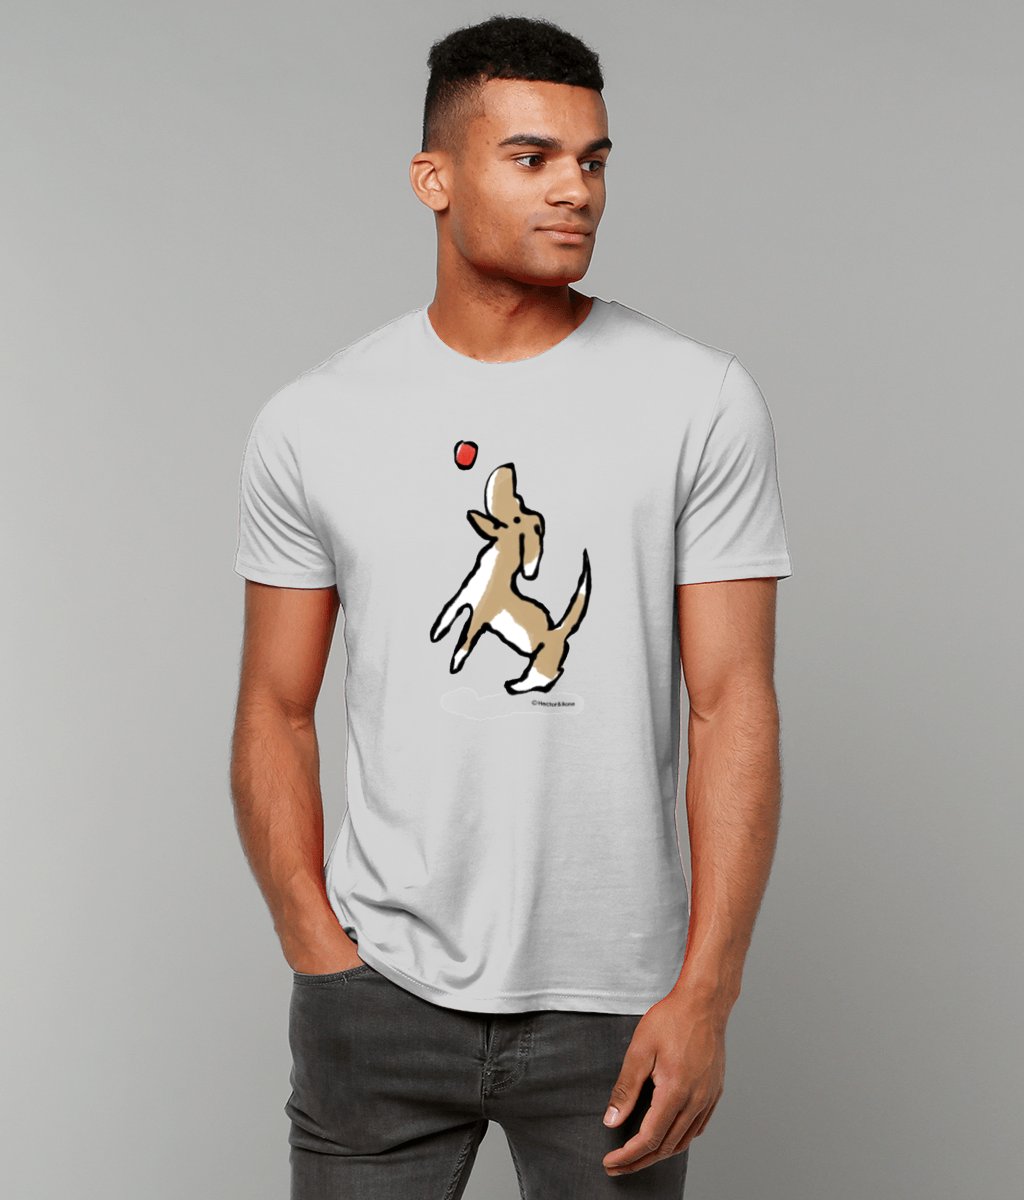 Dog T-shirt - Young man wearing an illustrated Jumping Dog T-shirt on heather grey vegan cotton by Hector and Bone